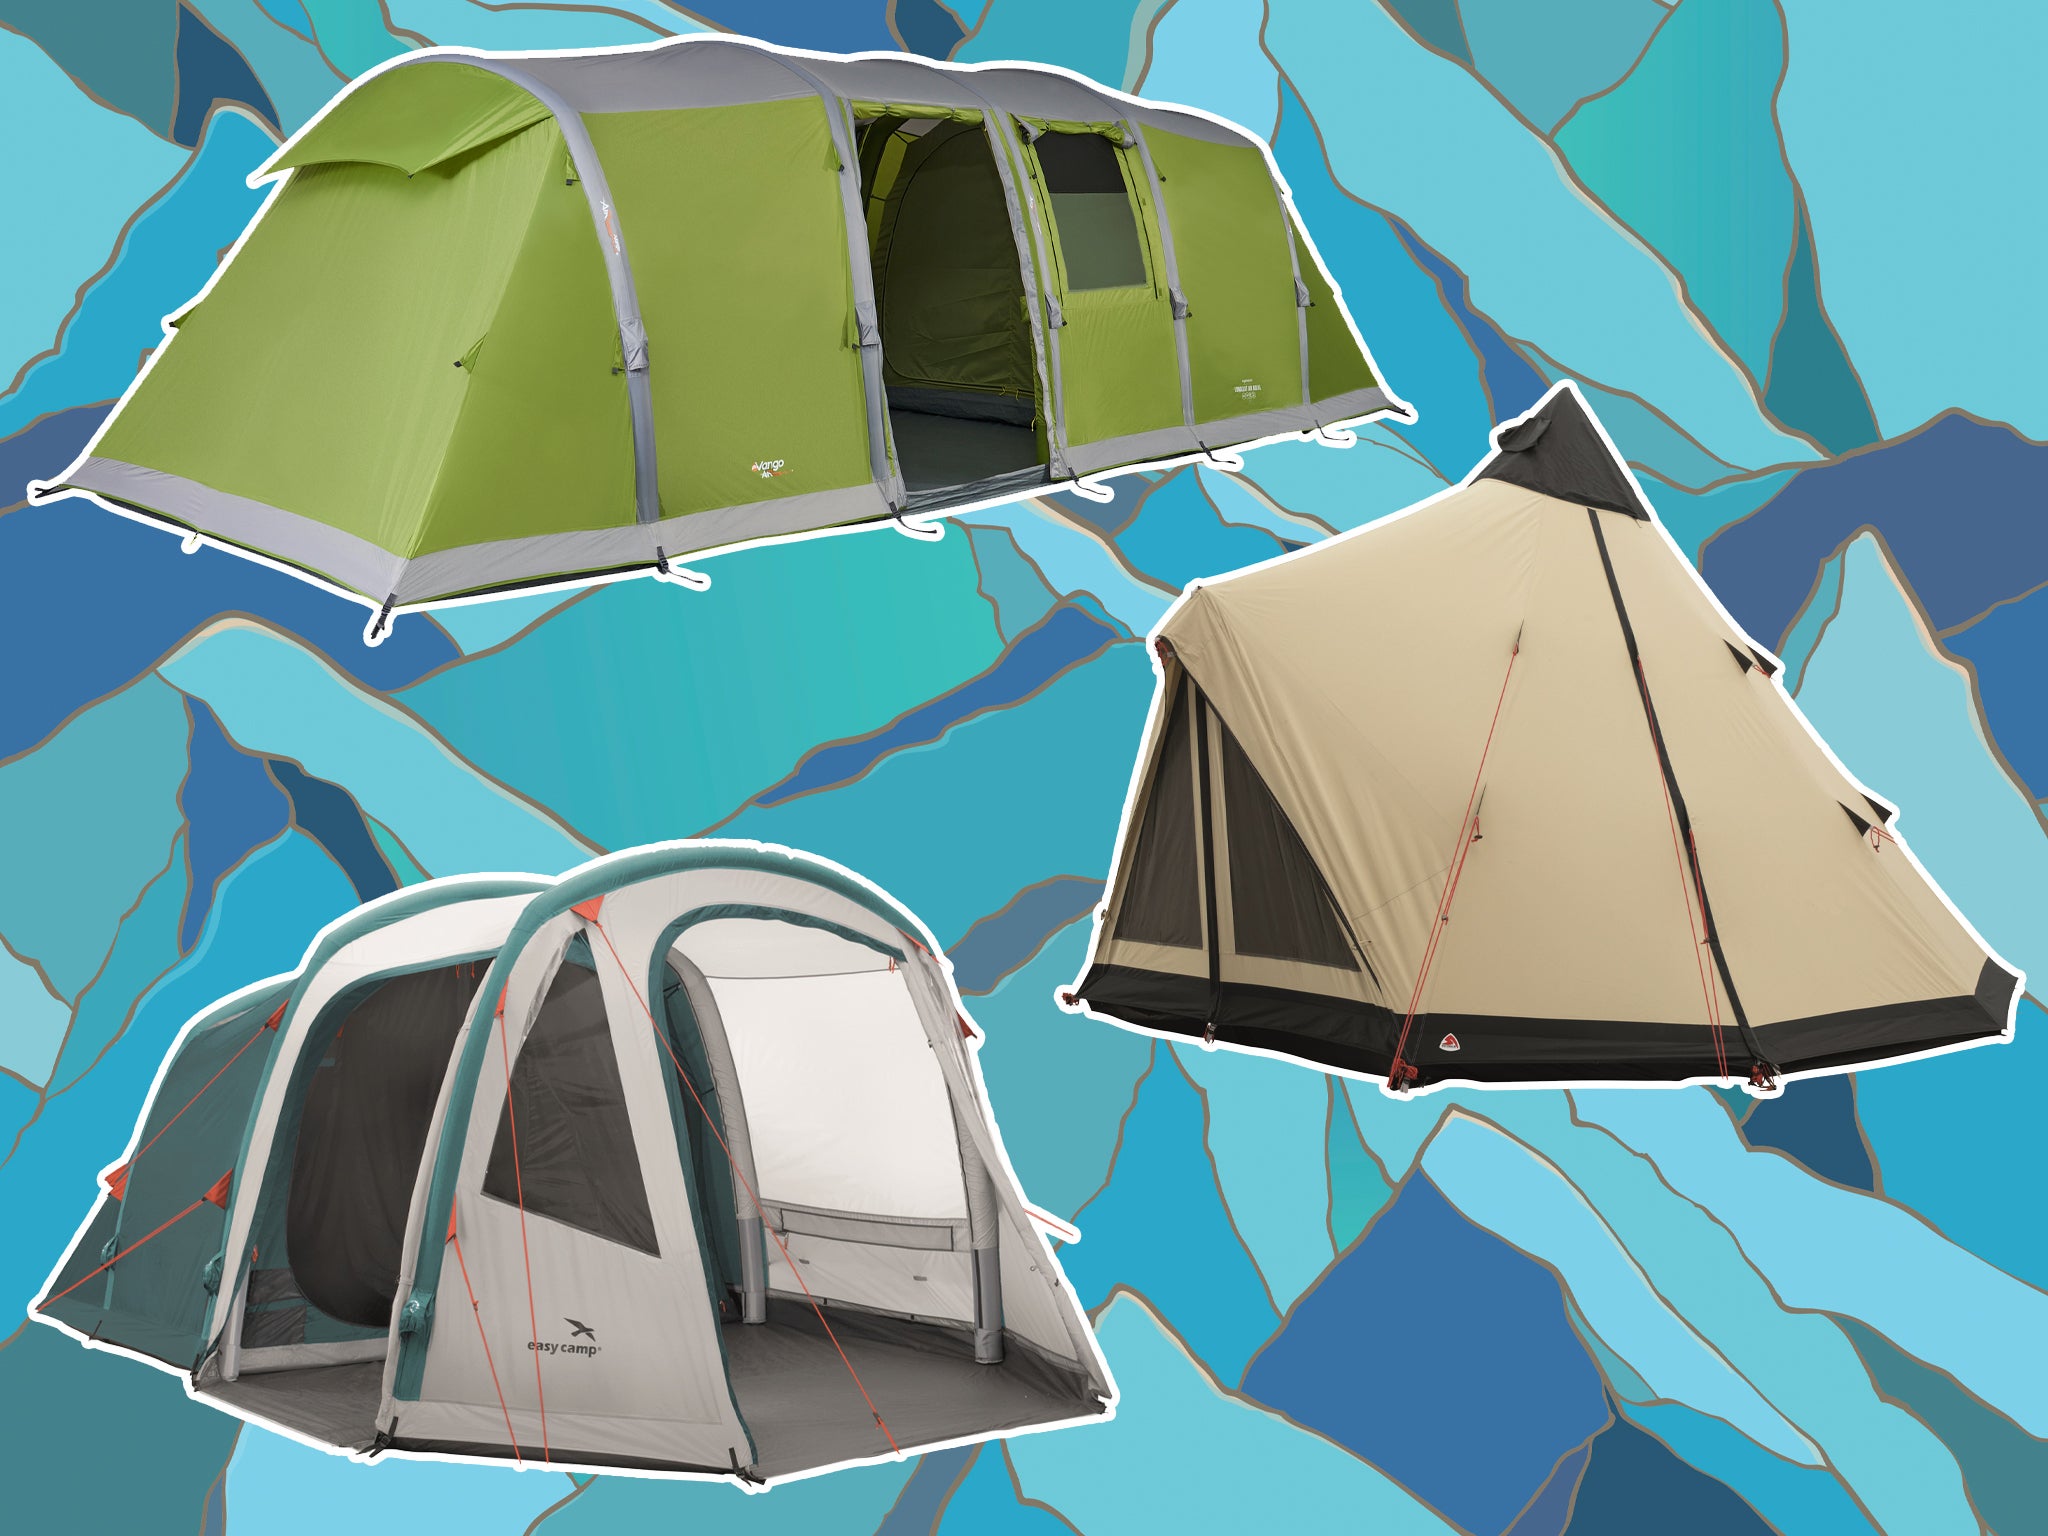 stand up tents for sale